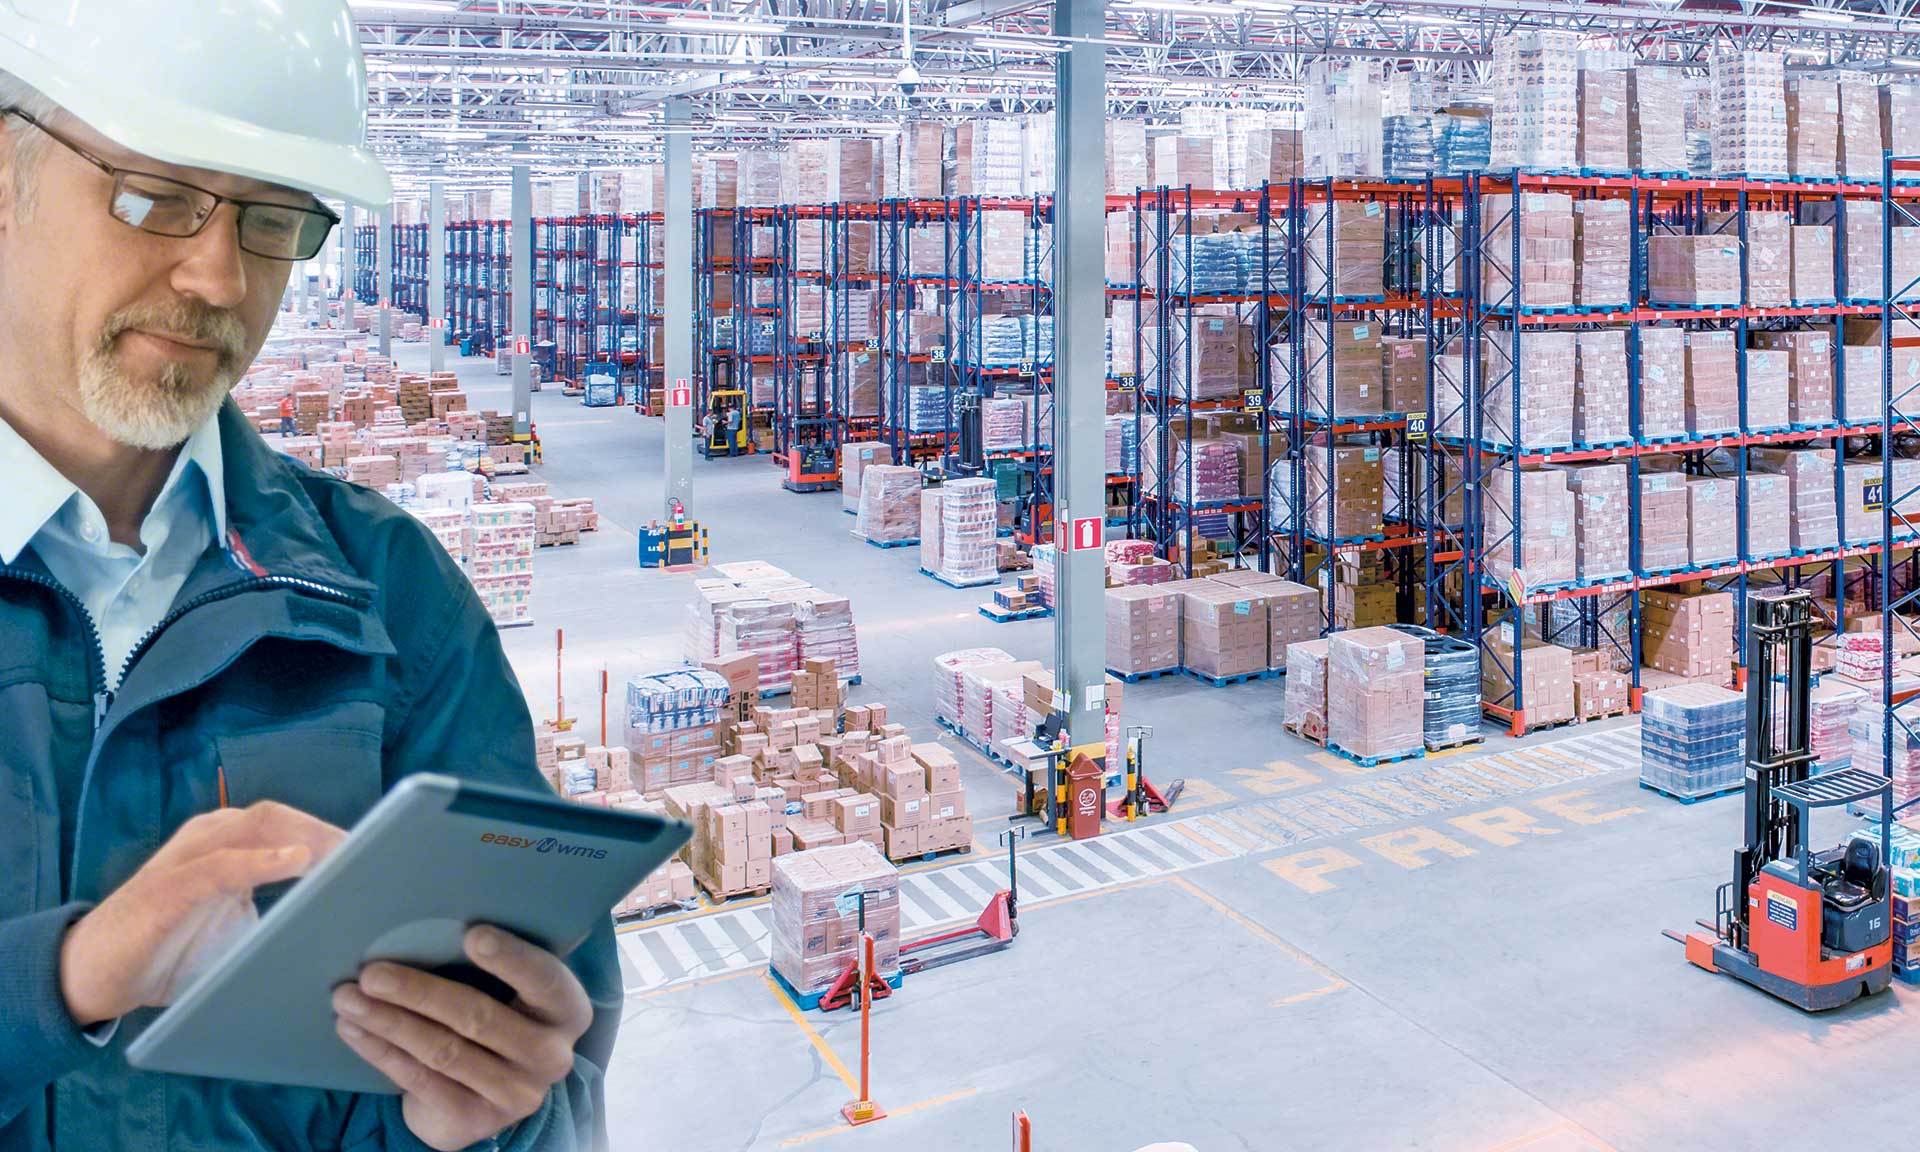 There are 10 logistics objectives companies should keep in mind to maximize their business